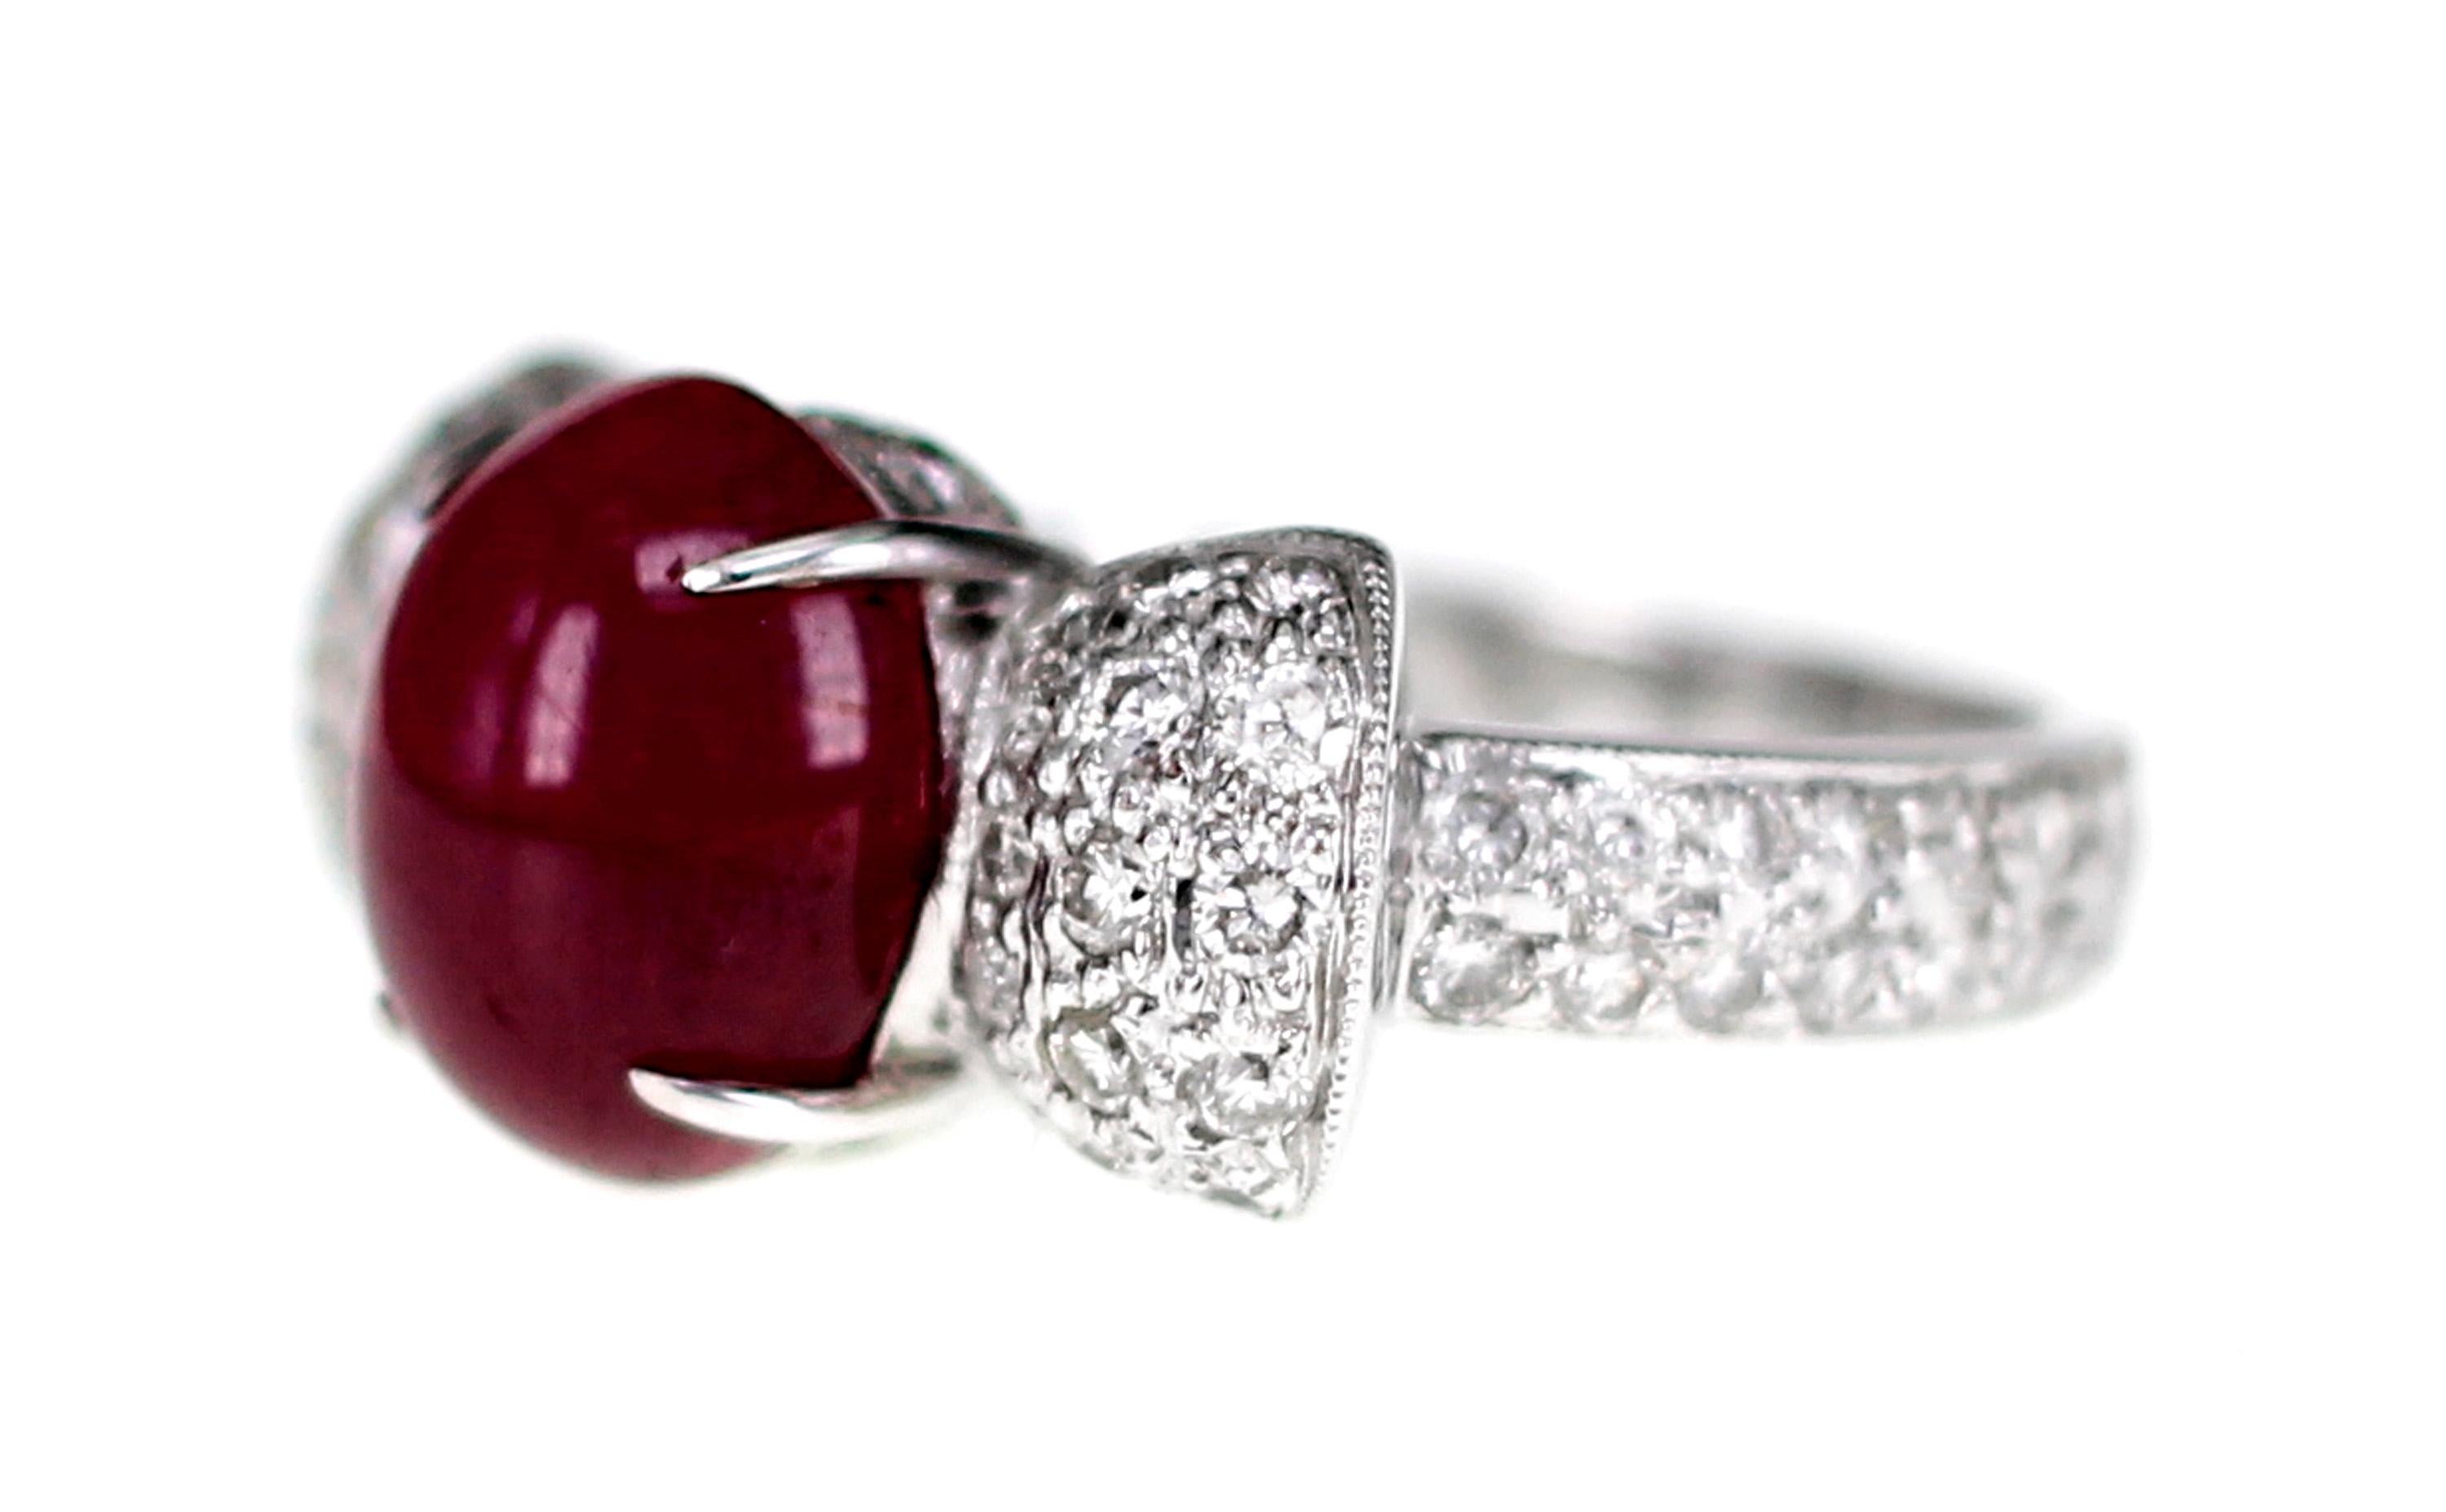 A 4.79 carat ruby is surrounded by a carat of white brilliant white diamond. This elegant ring can be worn for all occasions.  The Ruby used is in cabochon cut which was very popular in the 1800's. Now the trend is fast catching up, thus making this